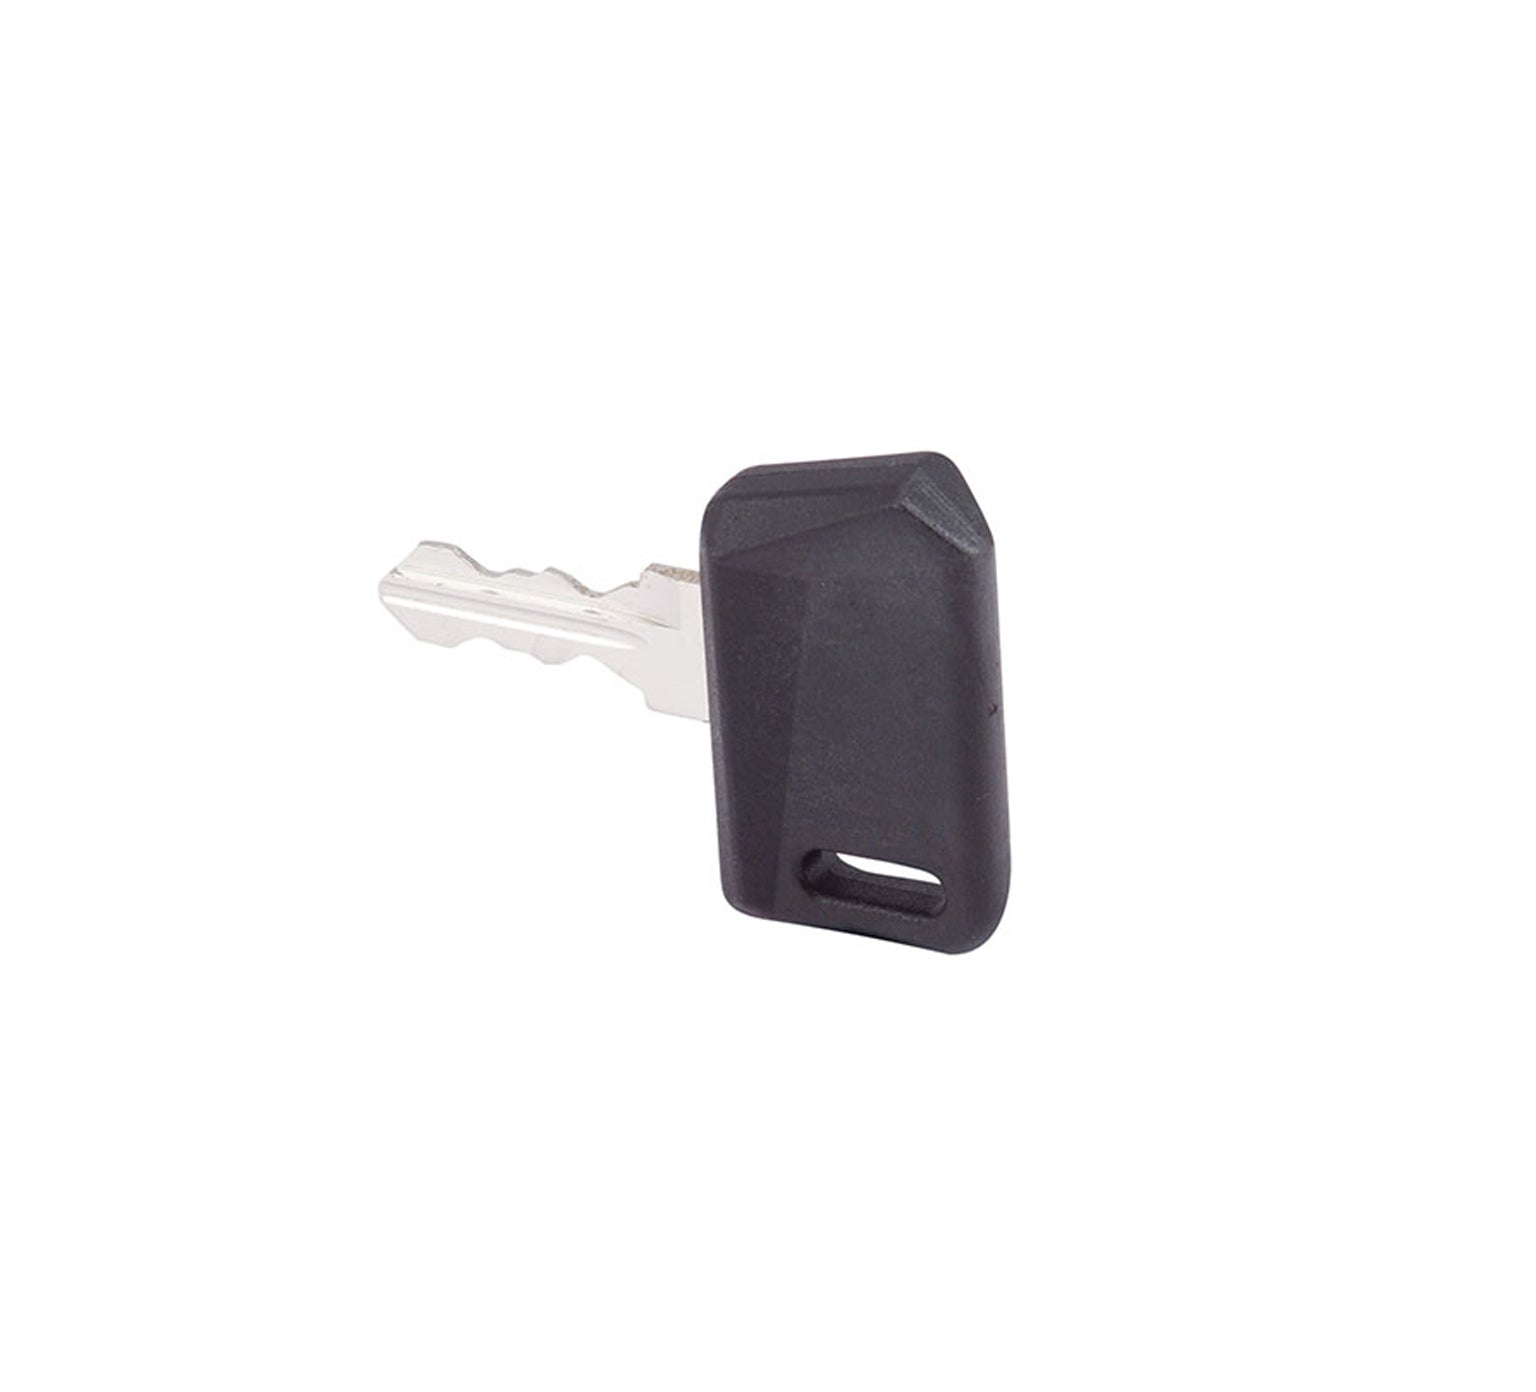 Single ignition key. Fits Tennant R14, 6100, 6200, 6400, 7100, 7200, 7300, 8300, S20, T5, T7, T12, T15, T16, T17 and also Nobles Strive Rider, SpeedScrub Rider, EZ Rider HP  Fits Tennant 361144